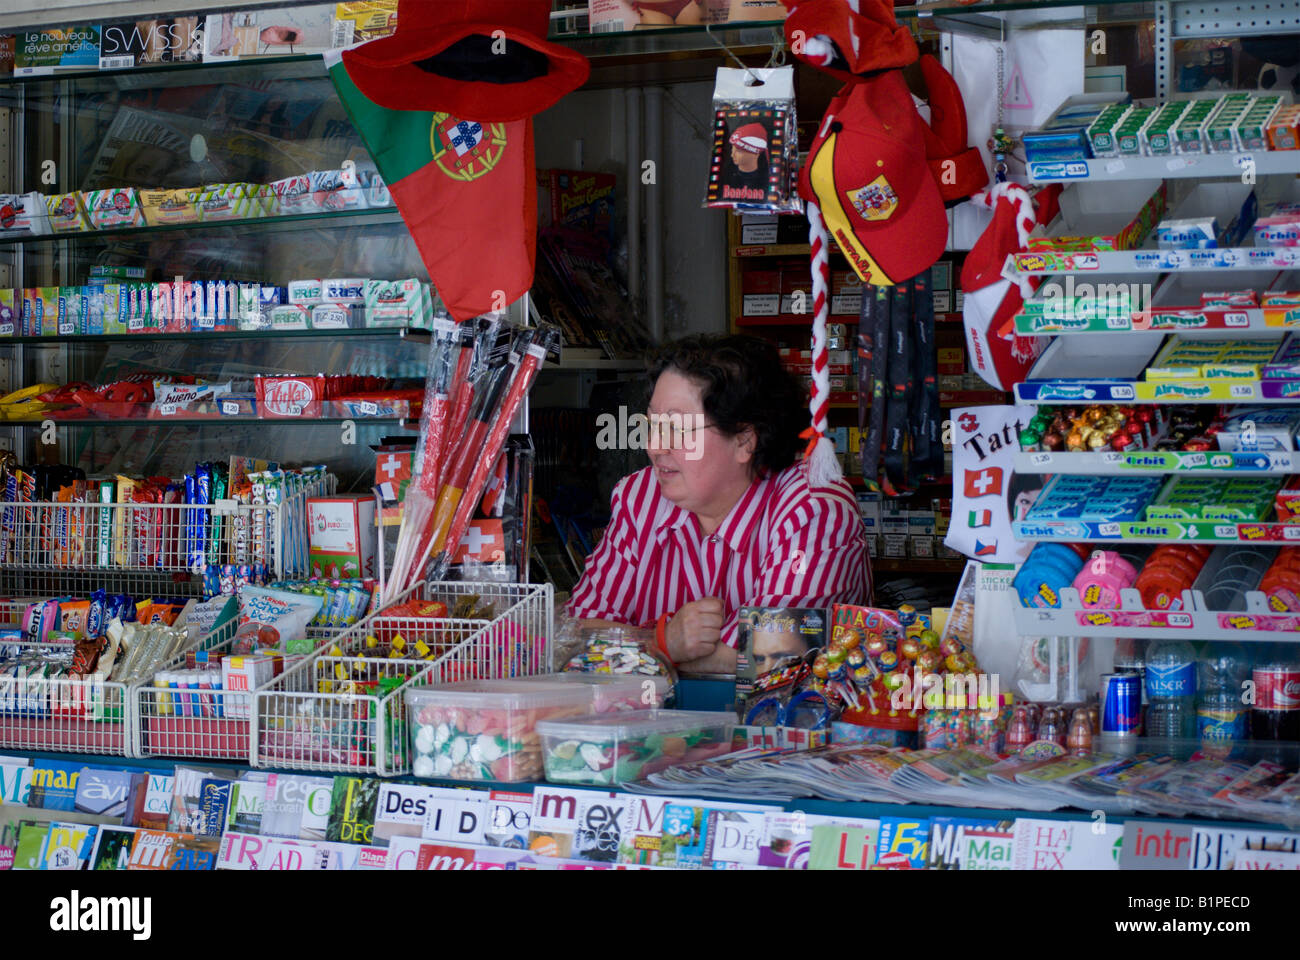 Woman looking out from kiosk where she works Stock Photo